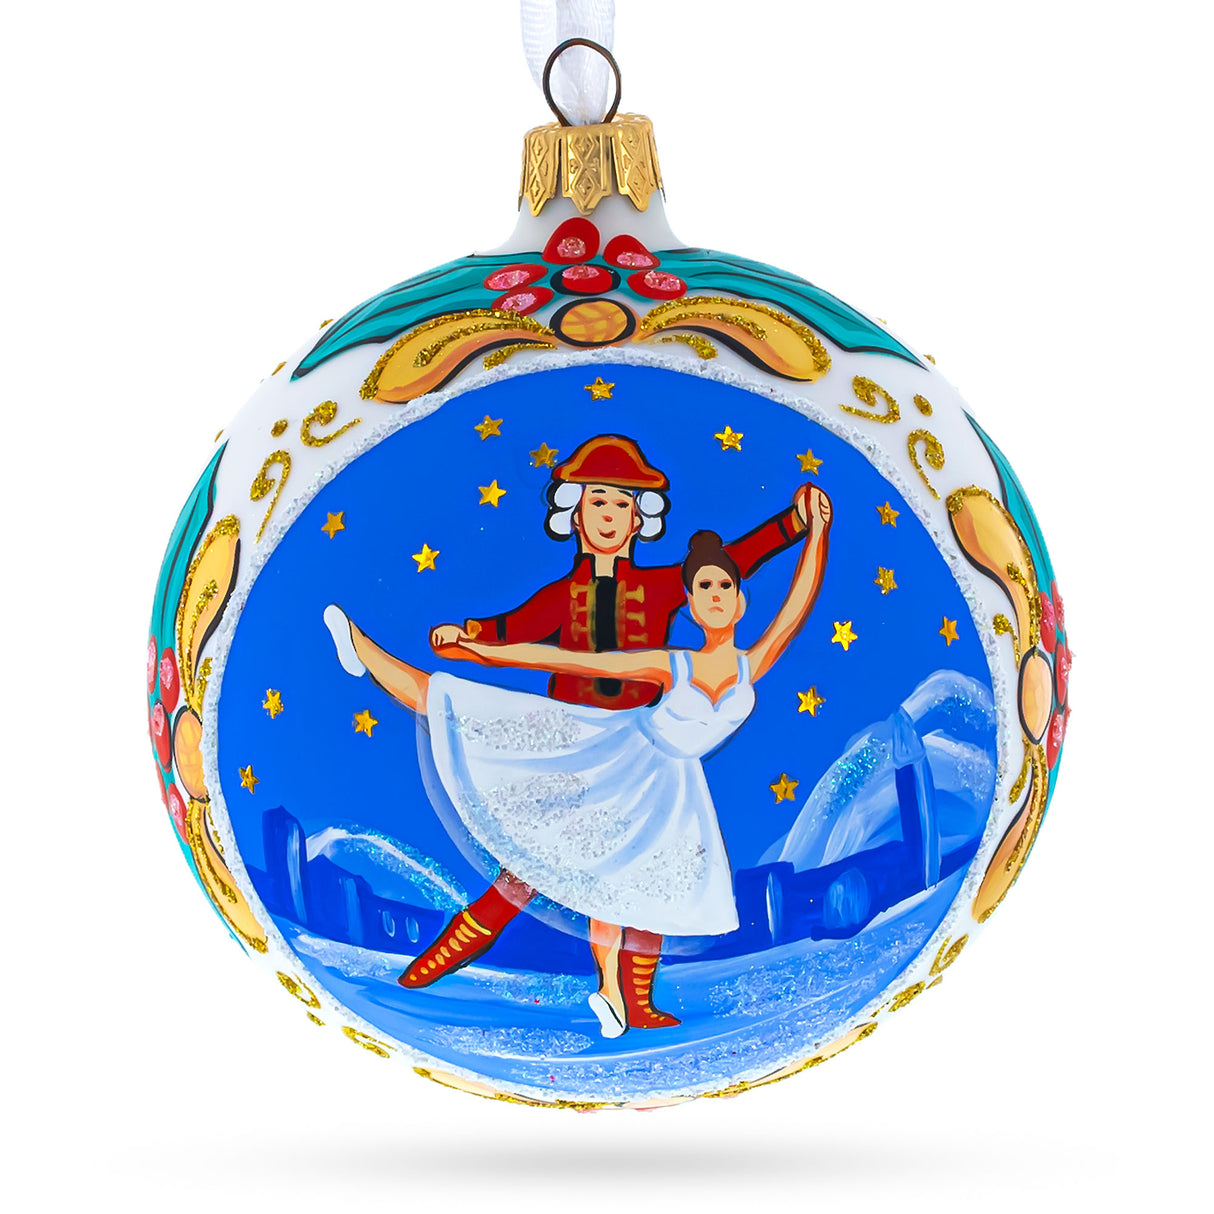 Elegant Ballet Dancers Blown Glass Ball Christmas Ornament 4 Inches in Blue color, Round shape